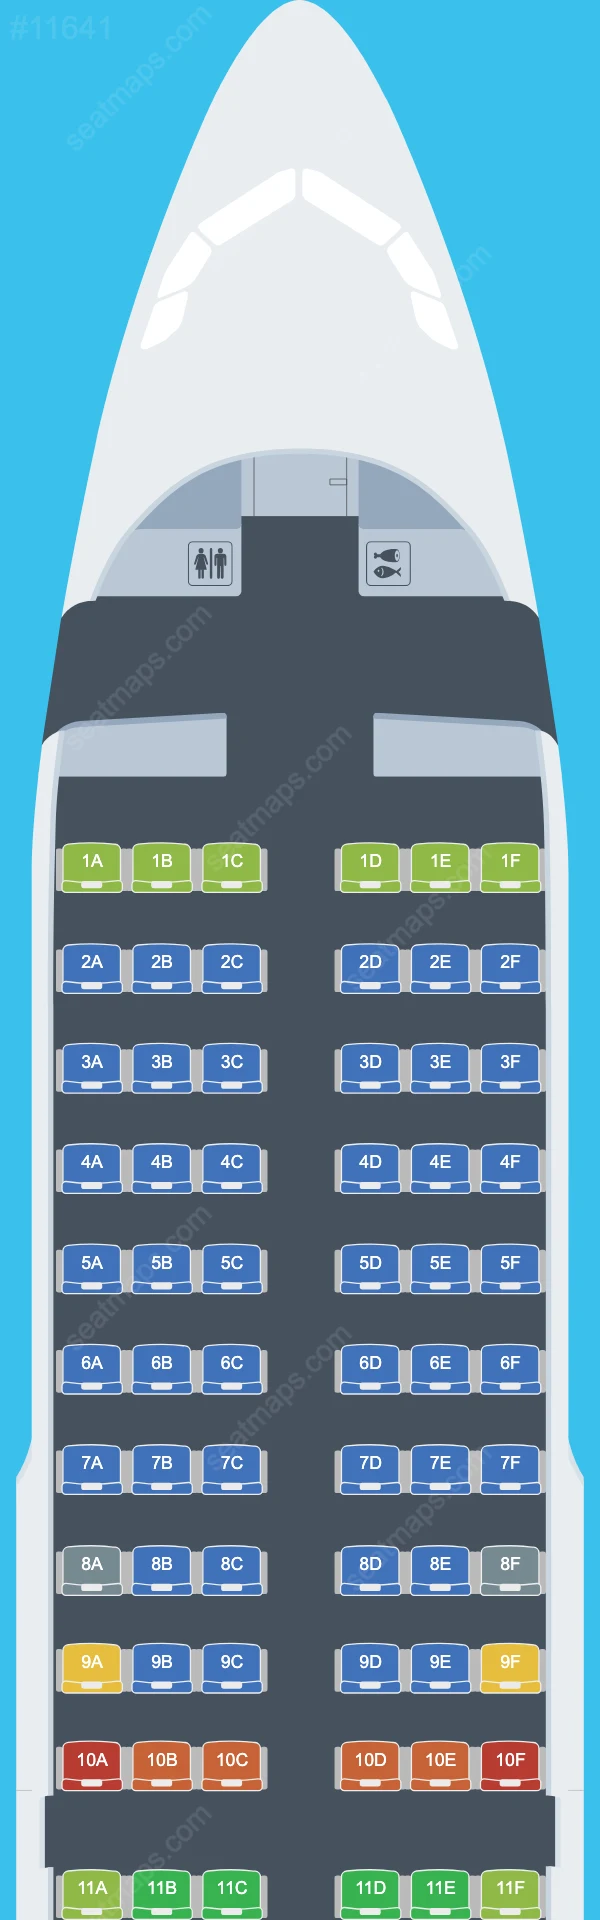 HiSky Europe Airbus A319 aircraft seat map  A319-100